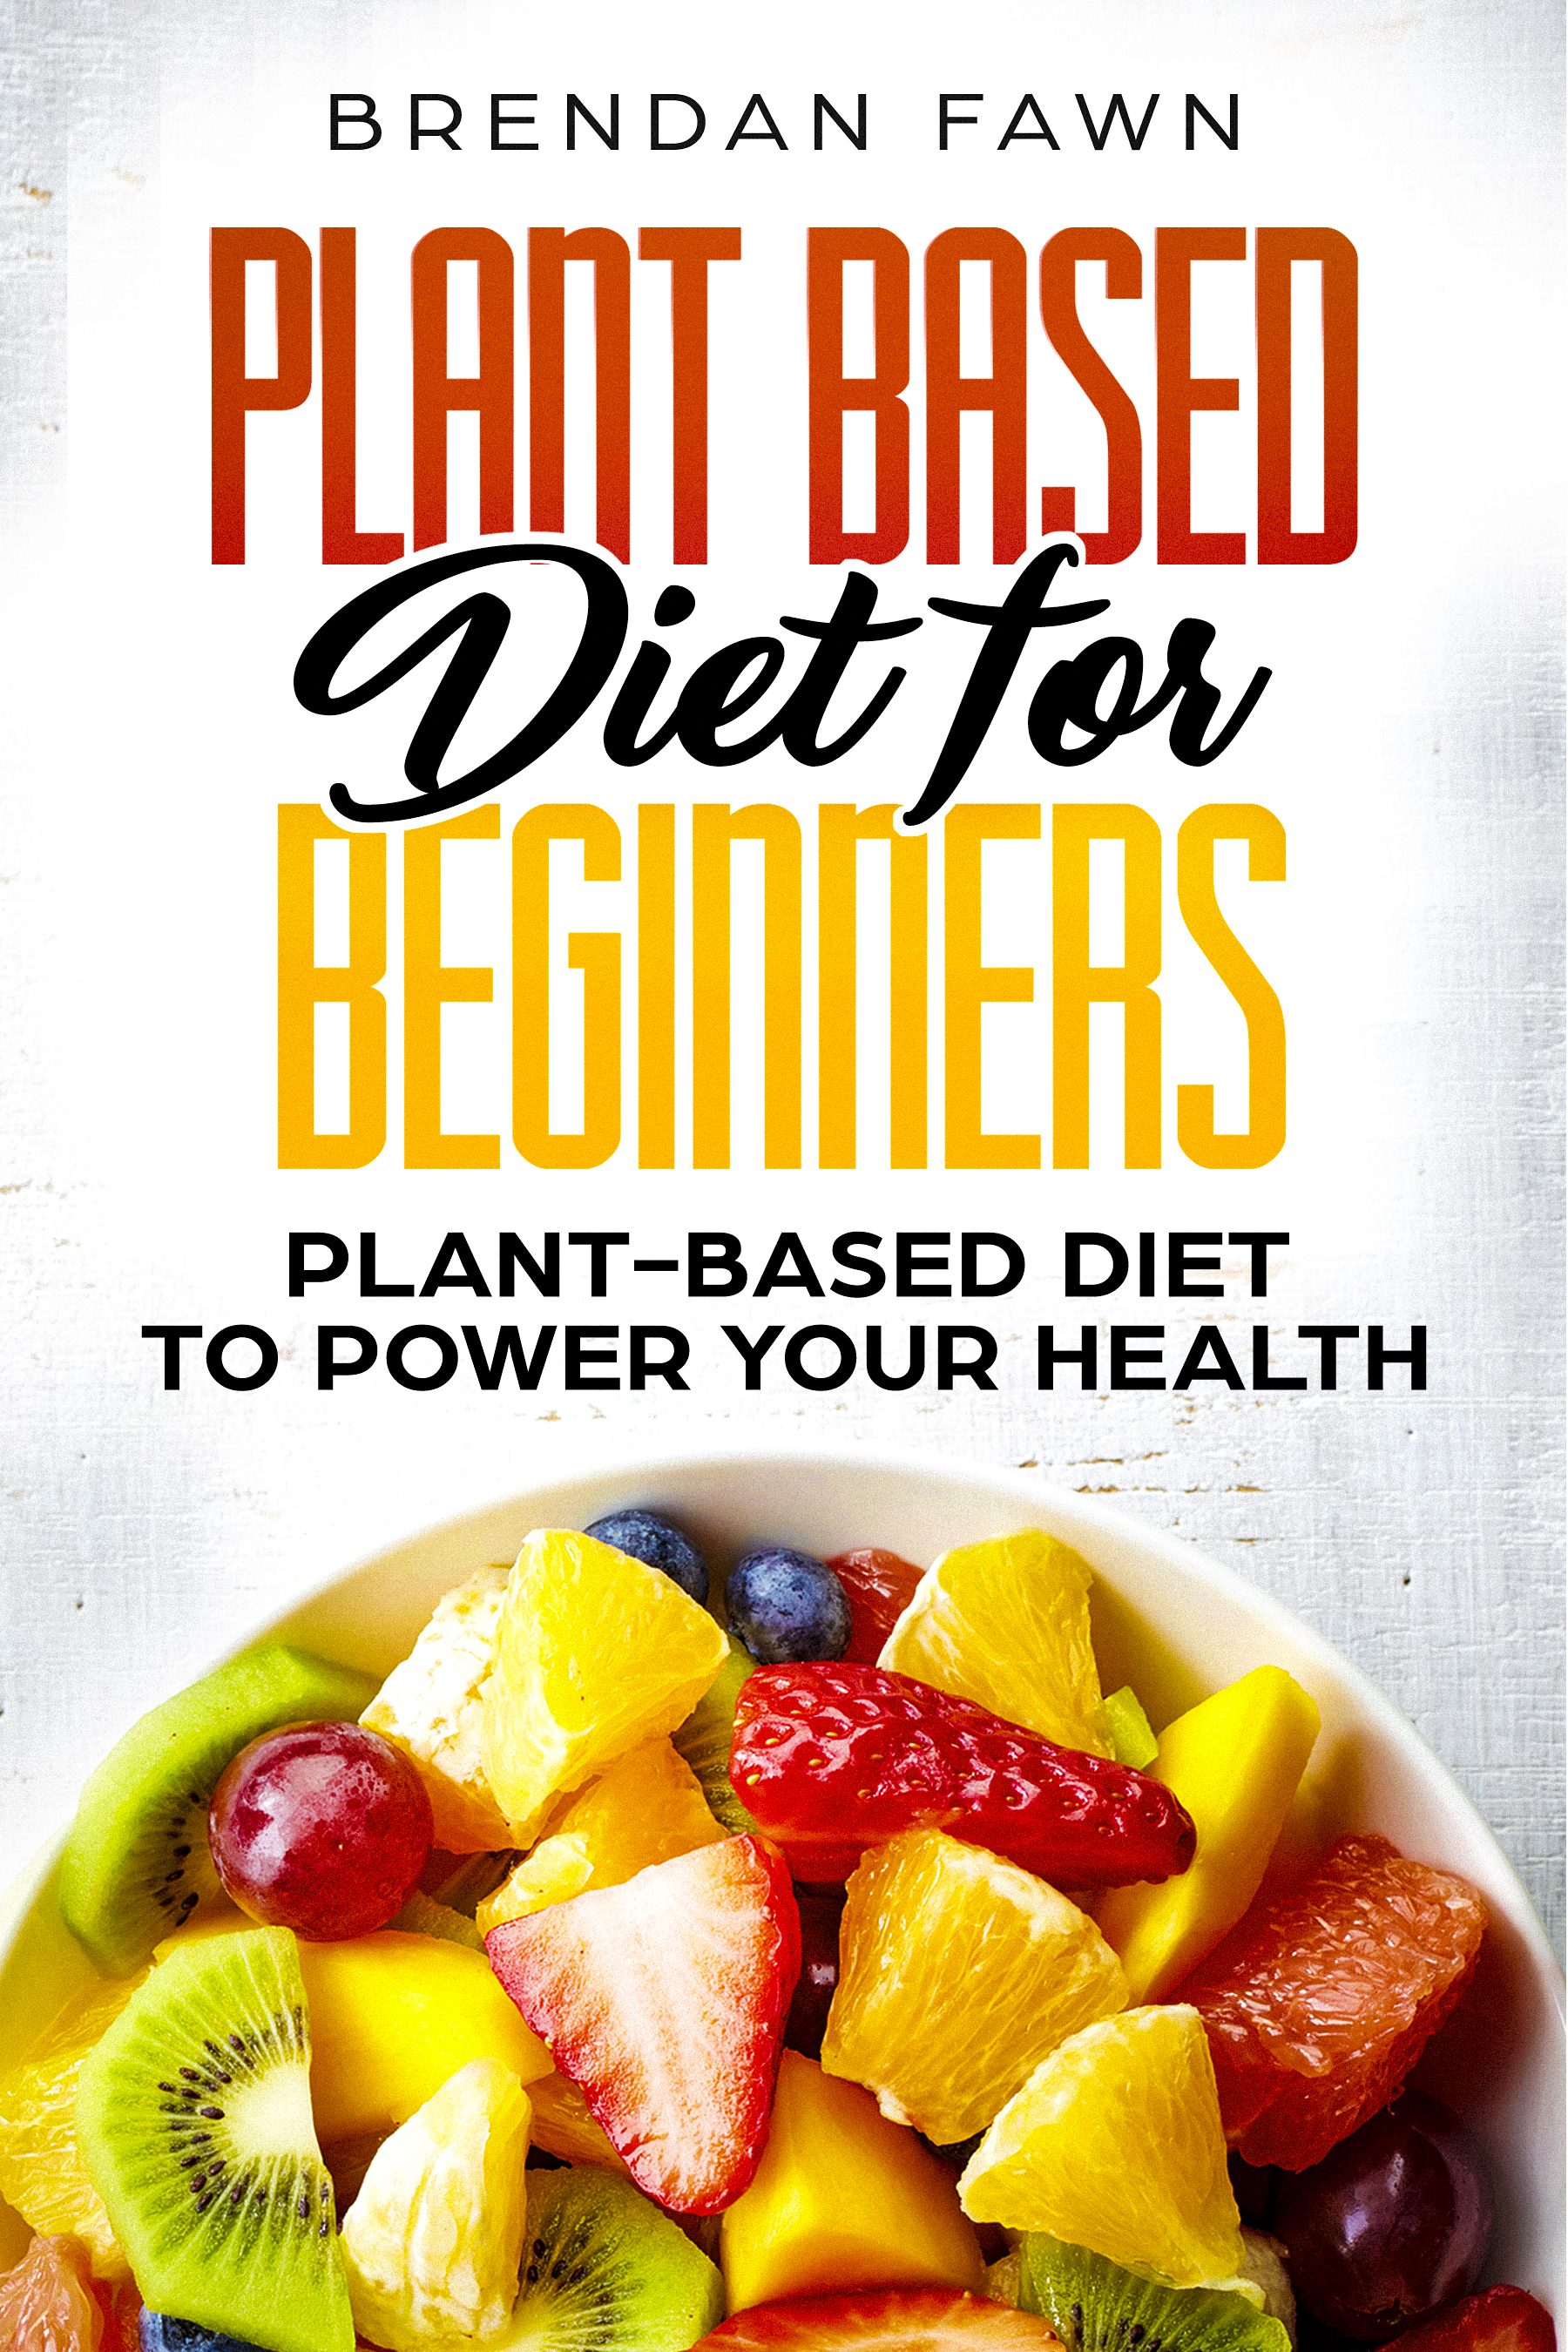 FREE: Plant Based Diet for Beginners by Brendan Fawn